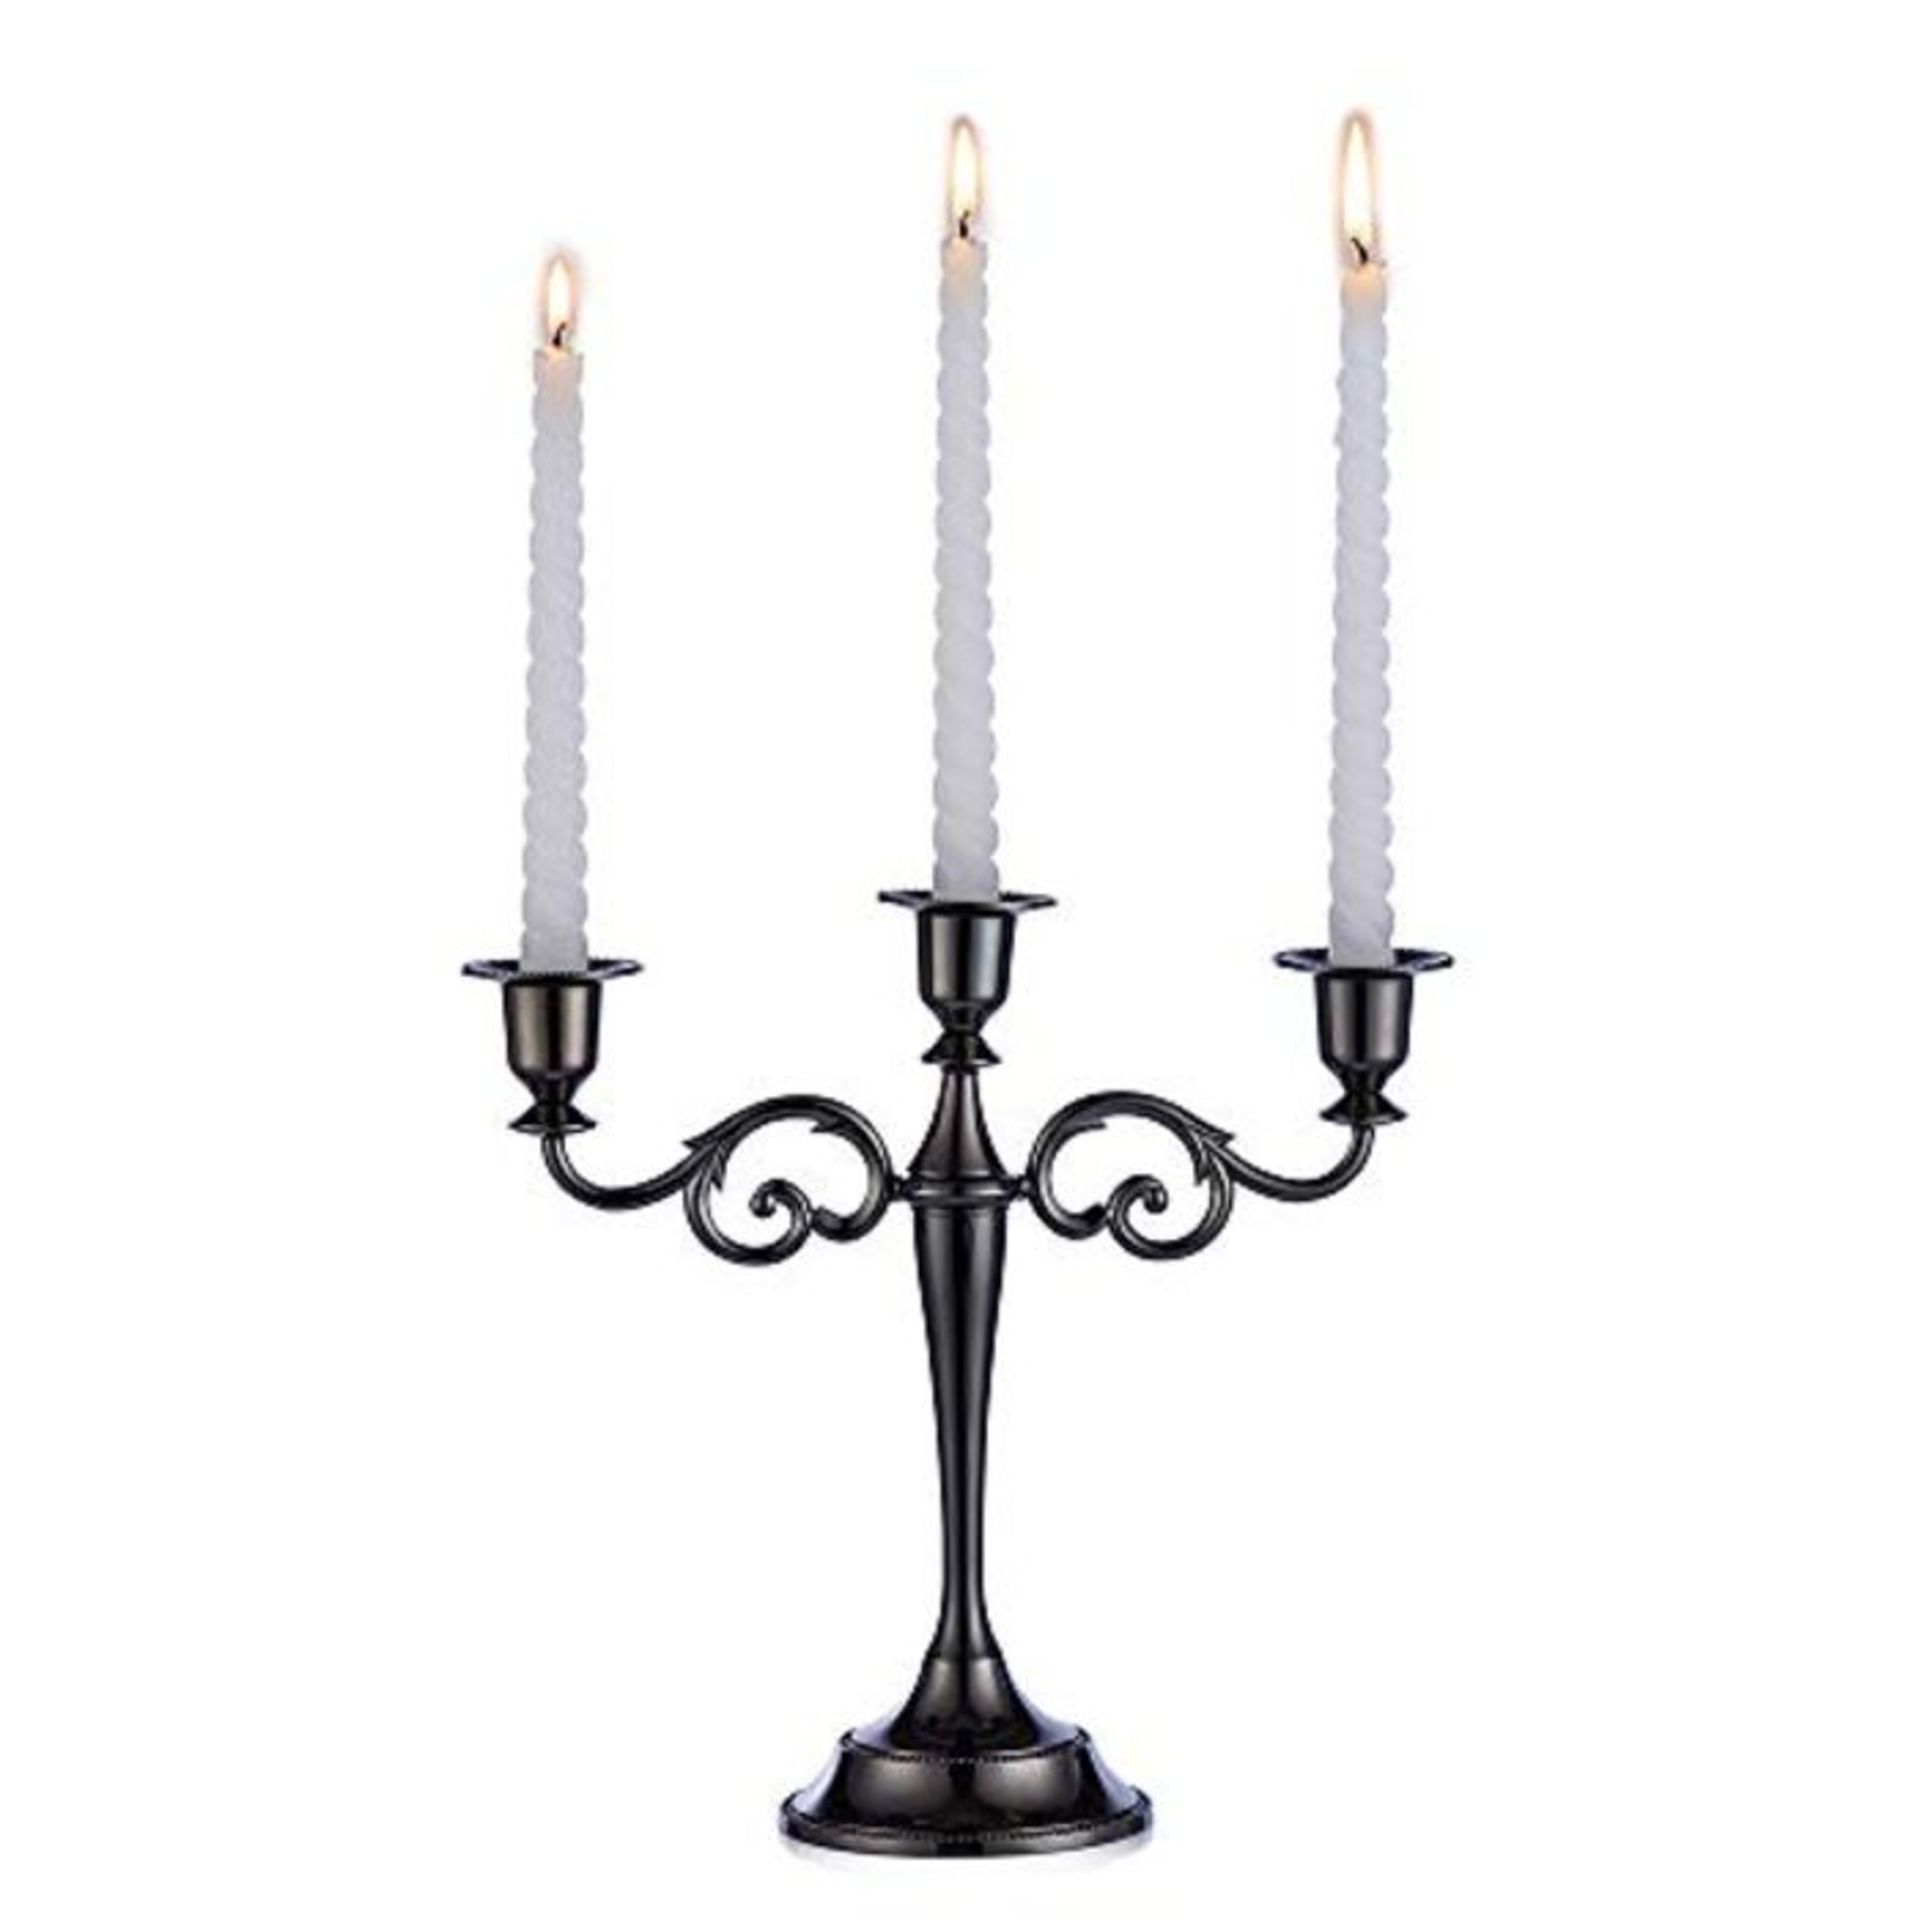 Sziqiqi Black metal candle holder 3-arms candle stand 27cm tall wedding event candelab